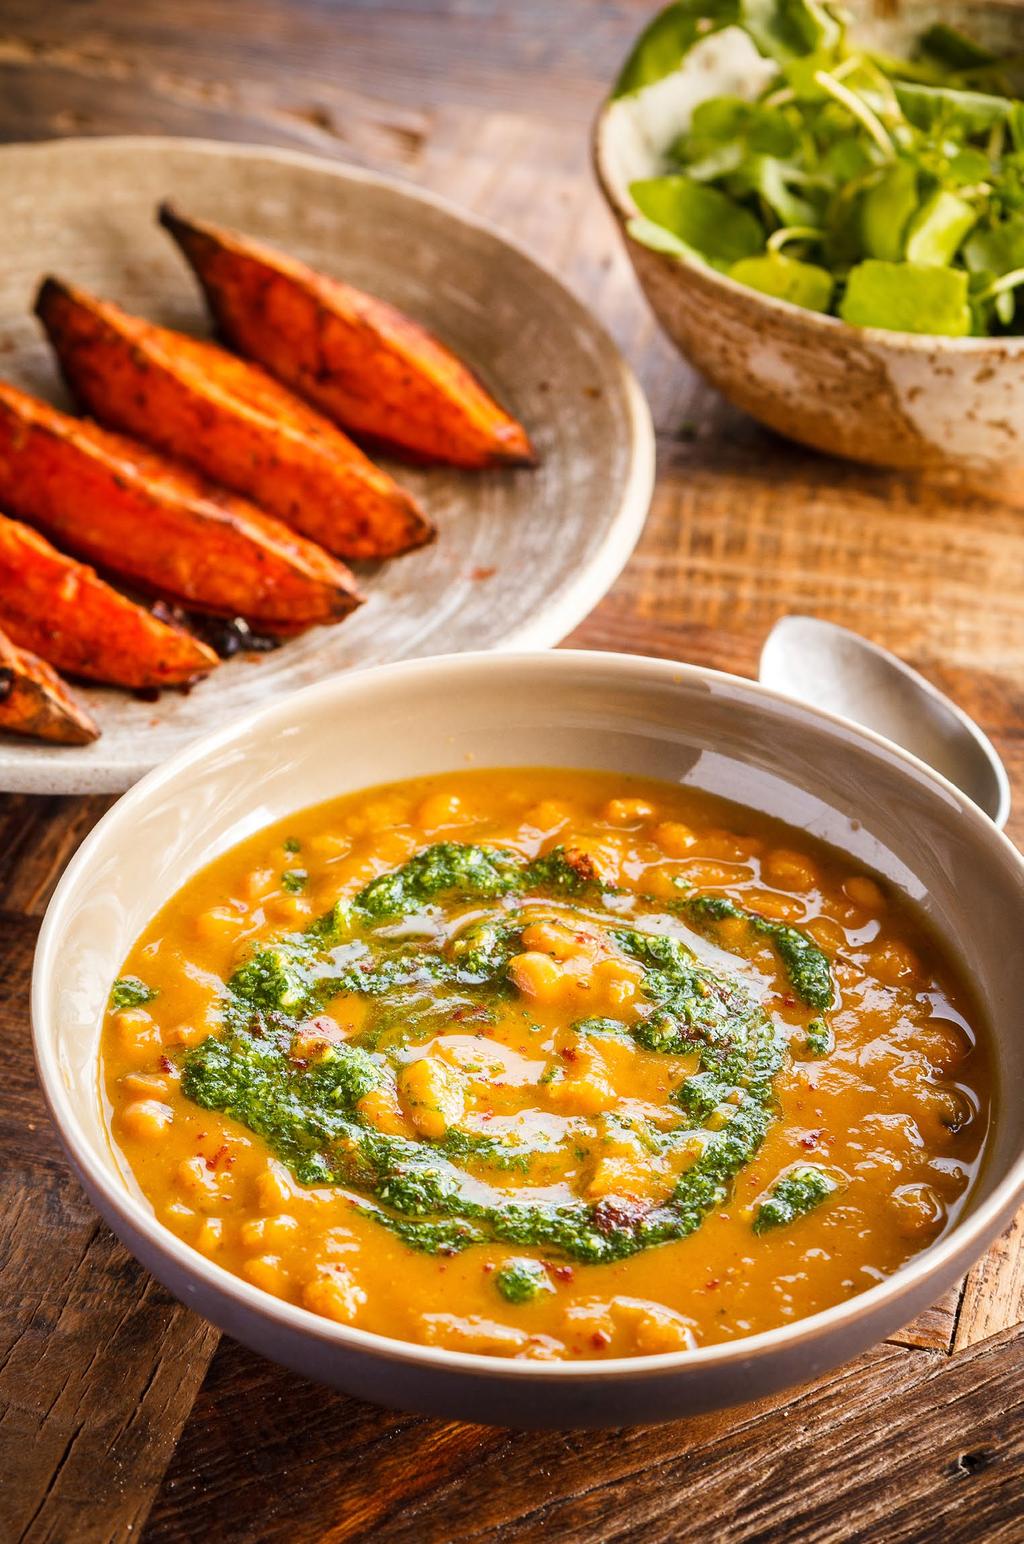 into meal-sized portions for freezing. Soups are robust and are happy to be reheated several times. Black-eyed bean and squash soup This is a chunky, filling soup.